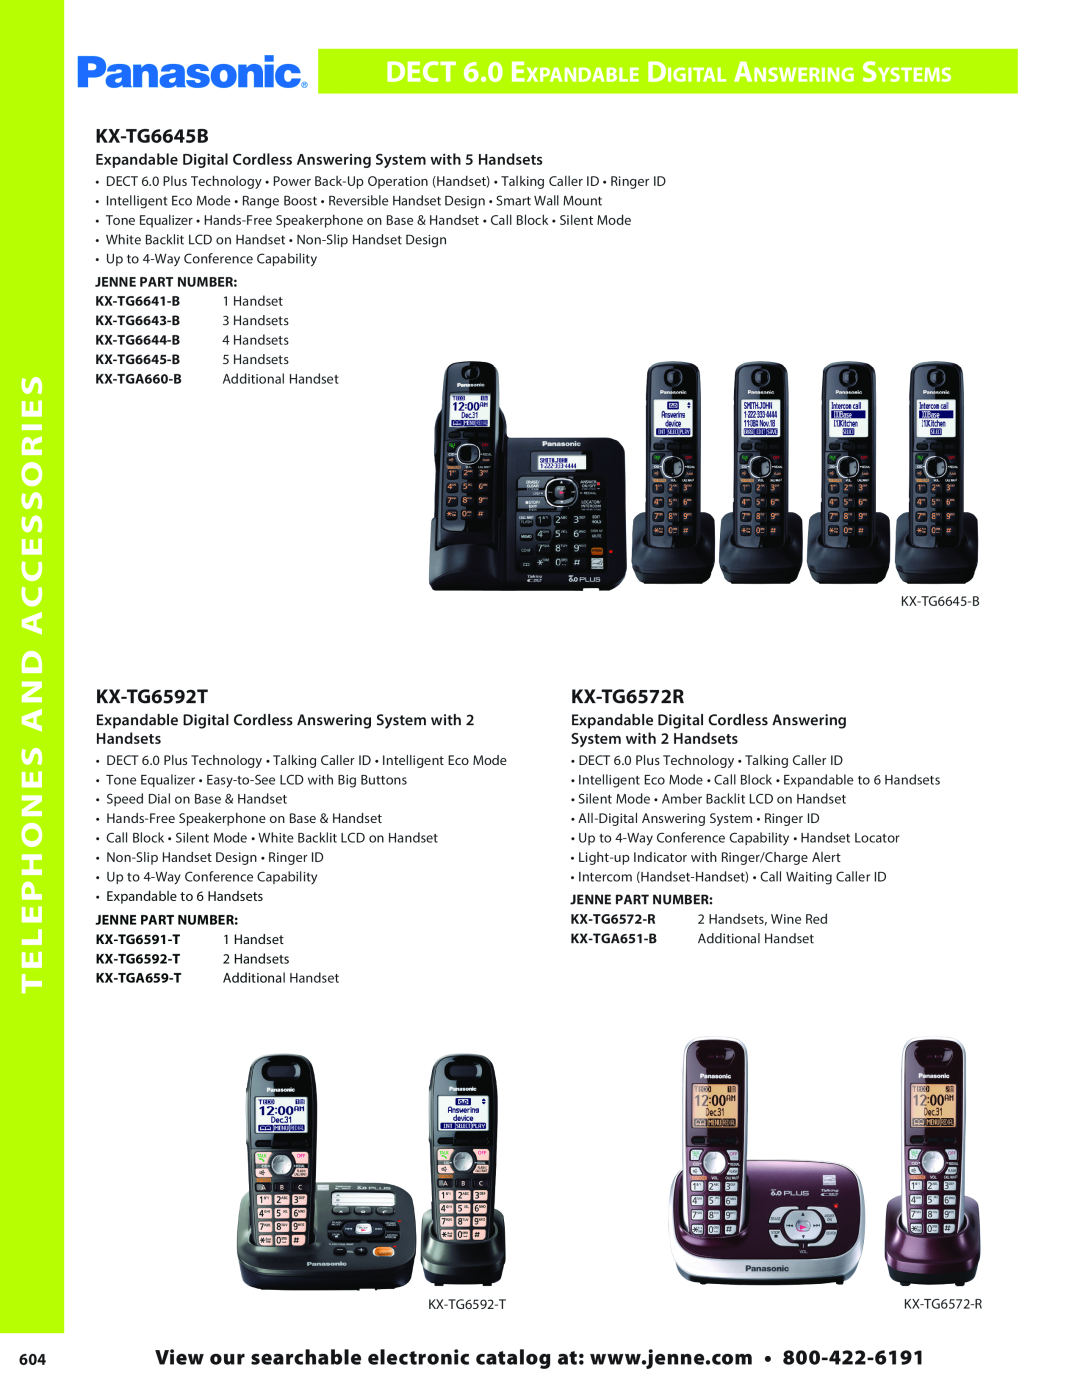 Panasonic PMPU2000 manual Telephones And Accessories, DECT 6.0 Expandable Digital Answering Systems, Handsets 